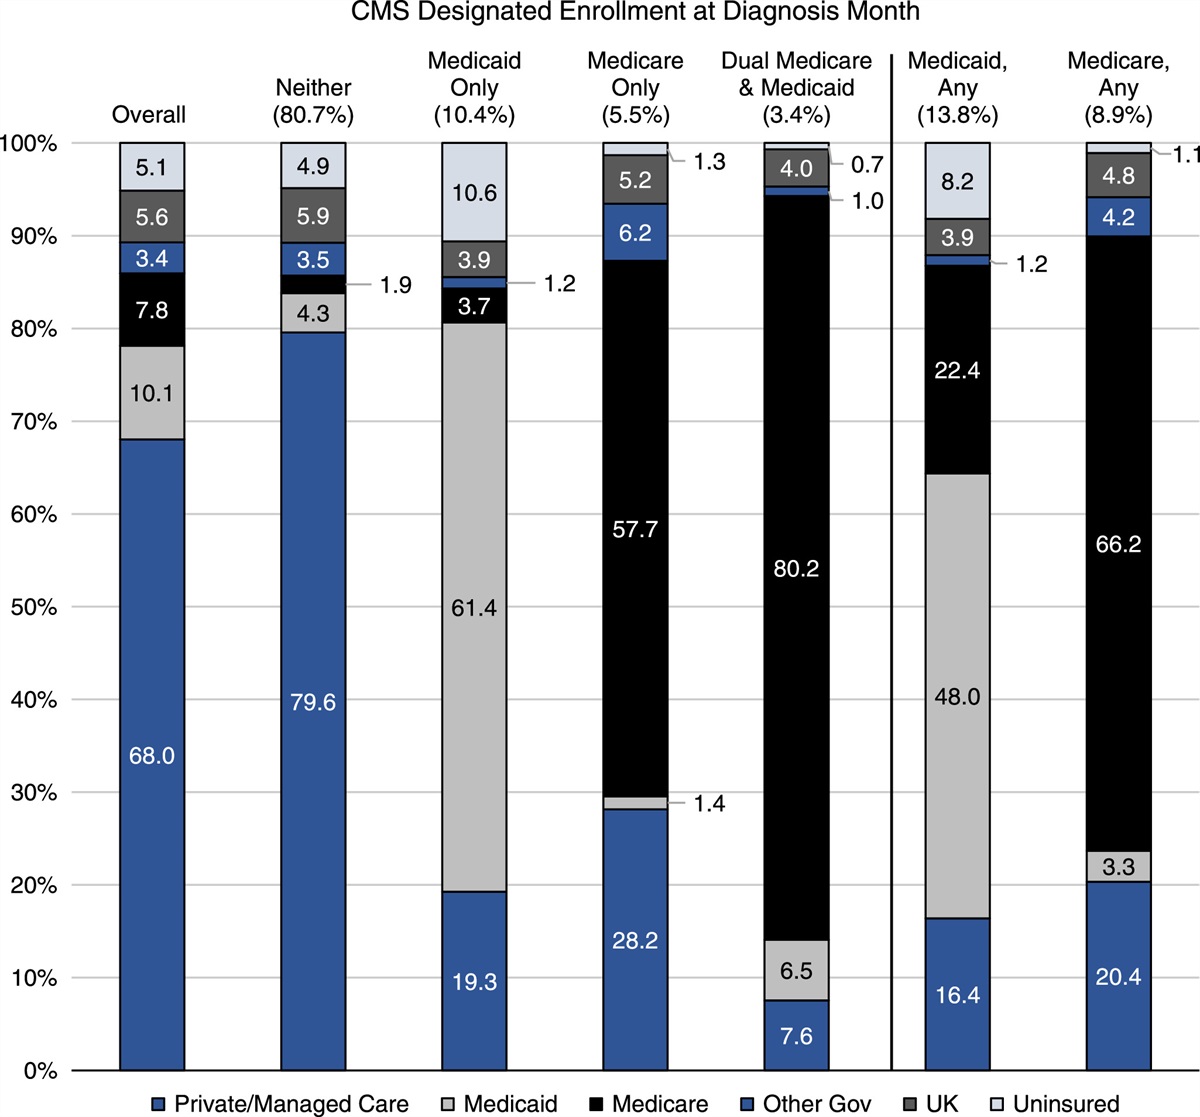 Accuracy of Cancer Registry Primary Payer Information and Implications for Policy Research